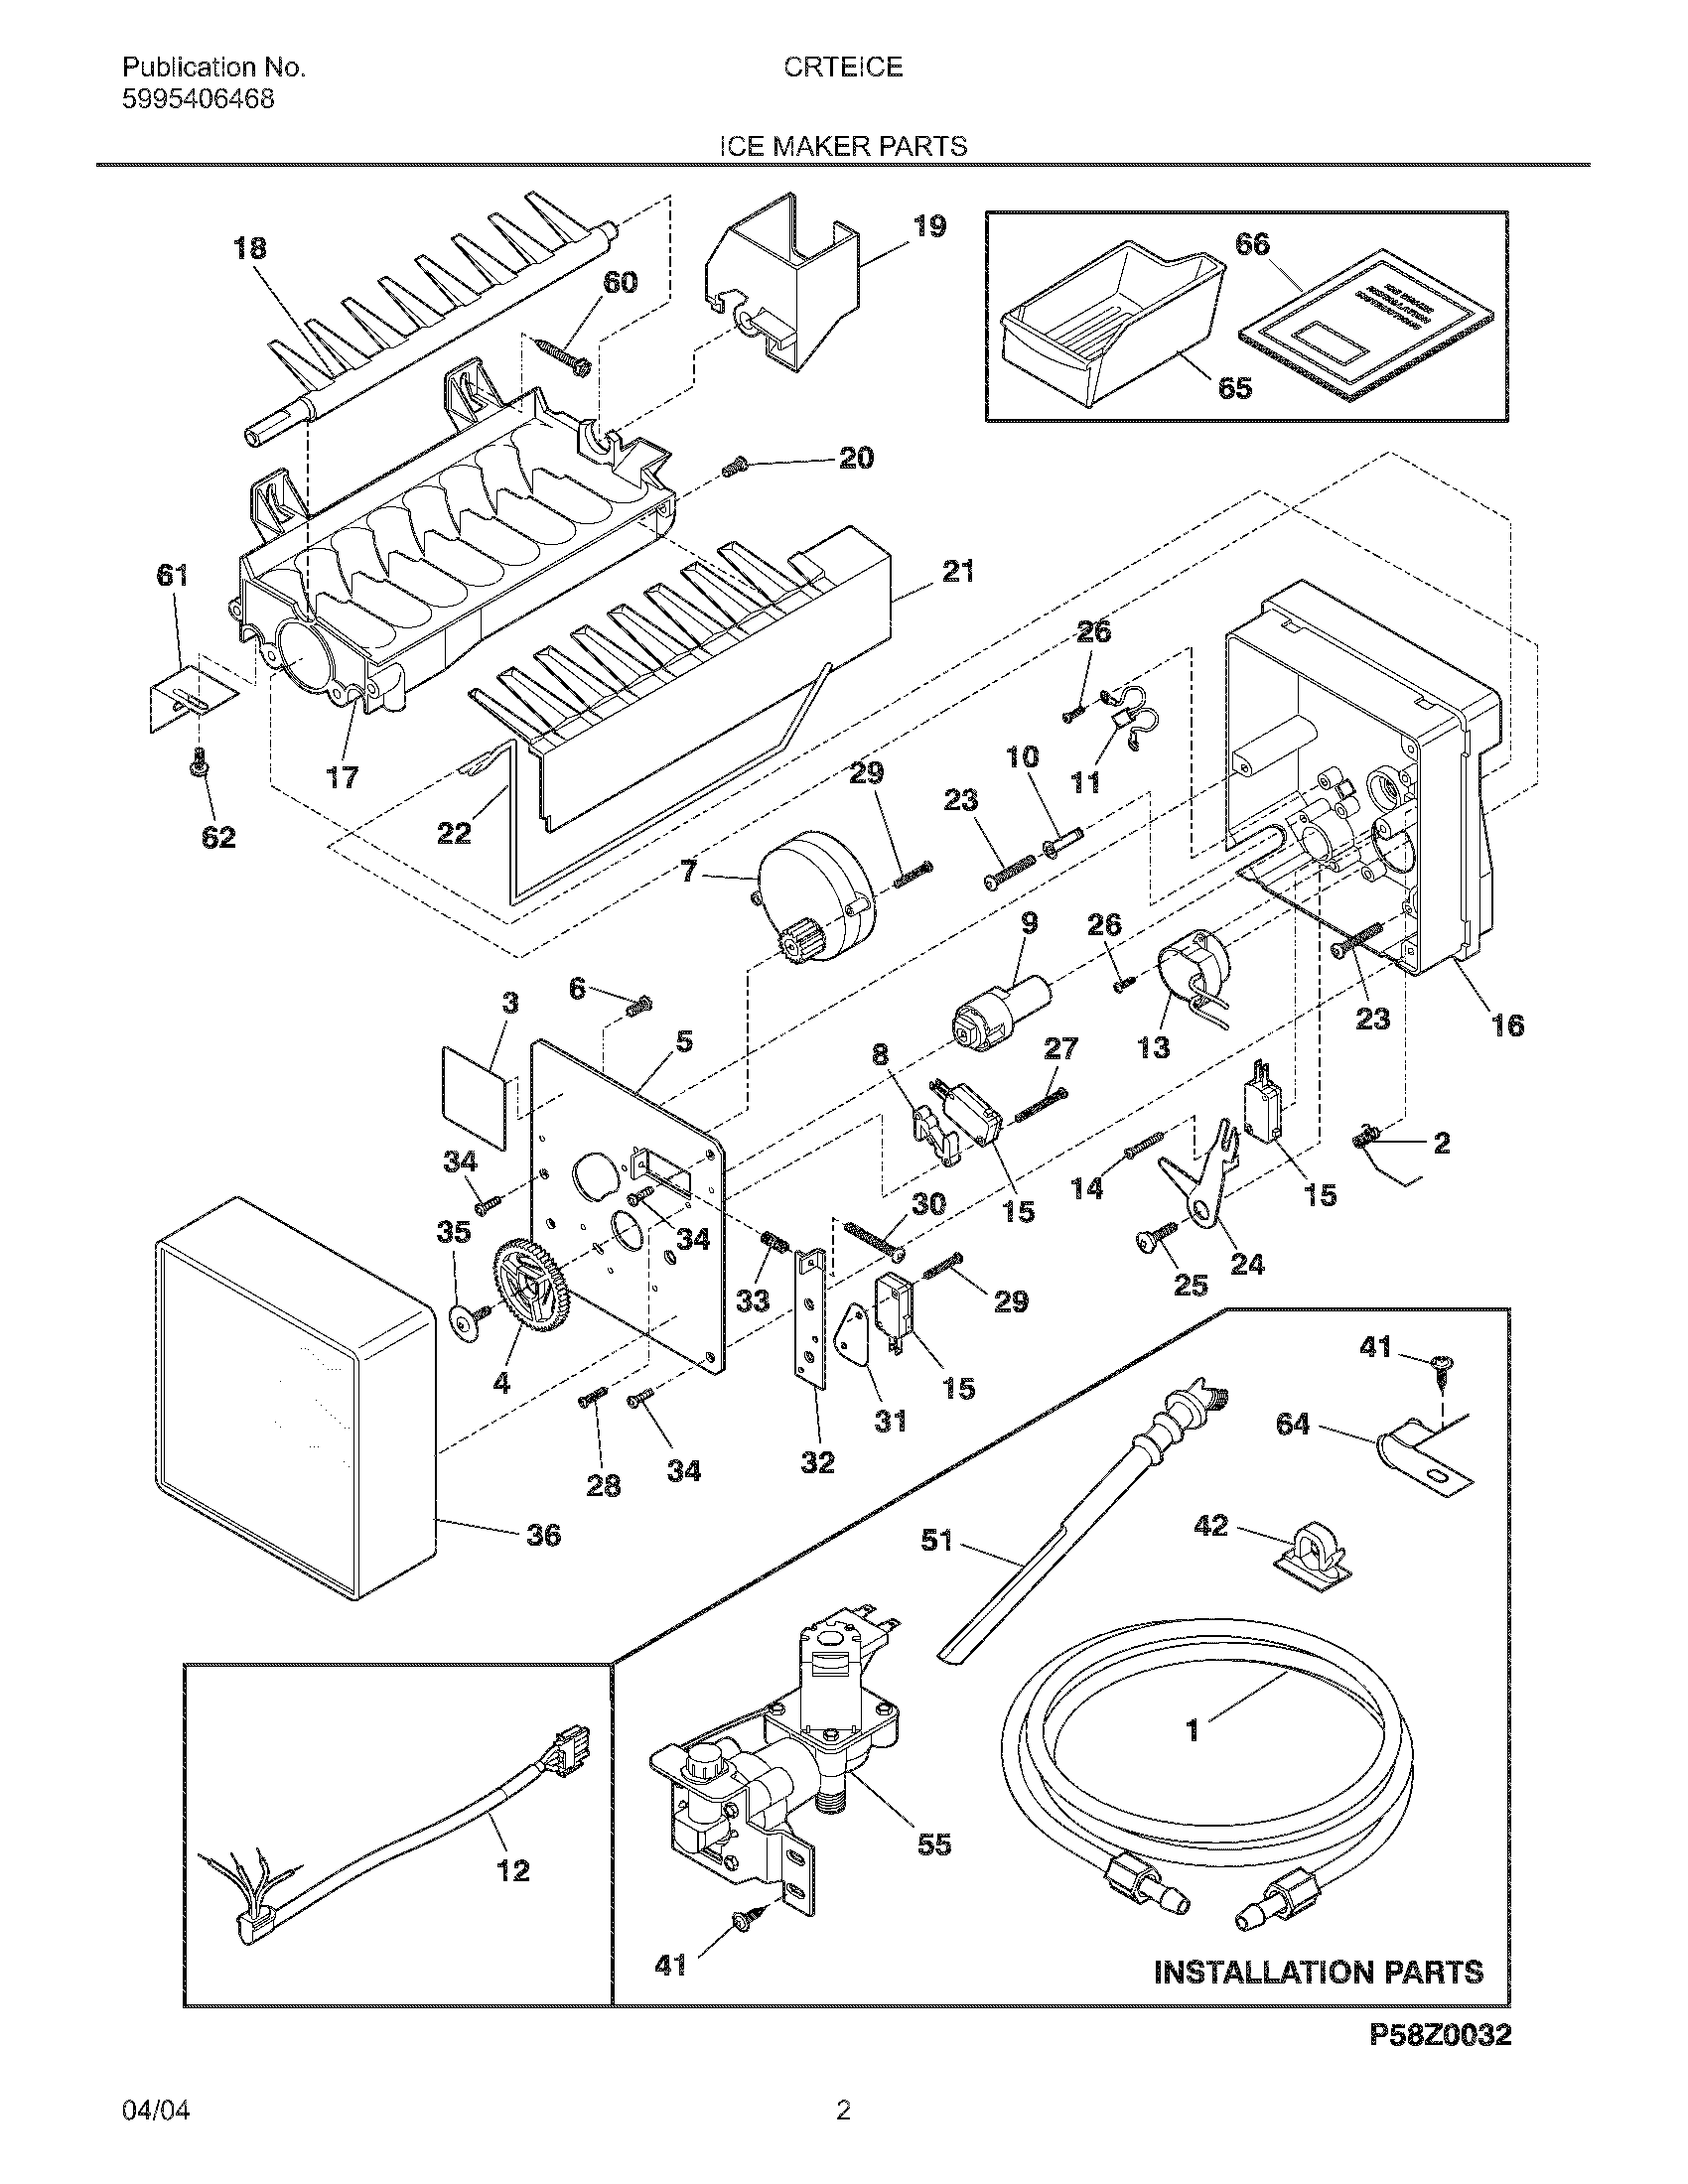 03 - REPLACEMENT PARTS